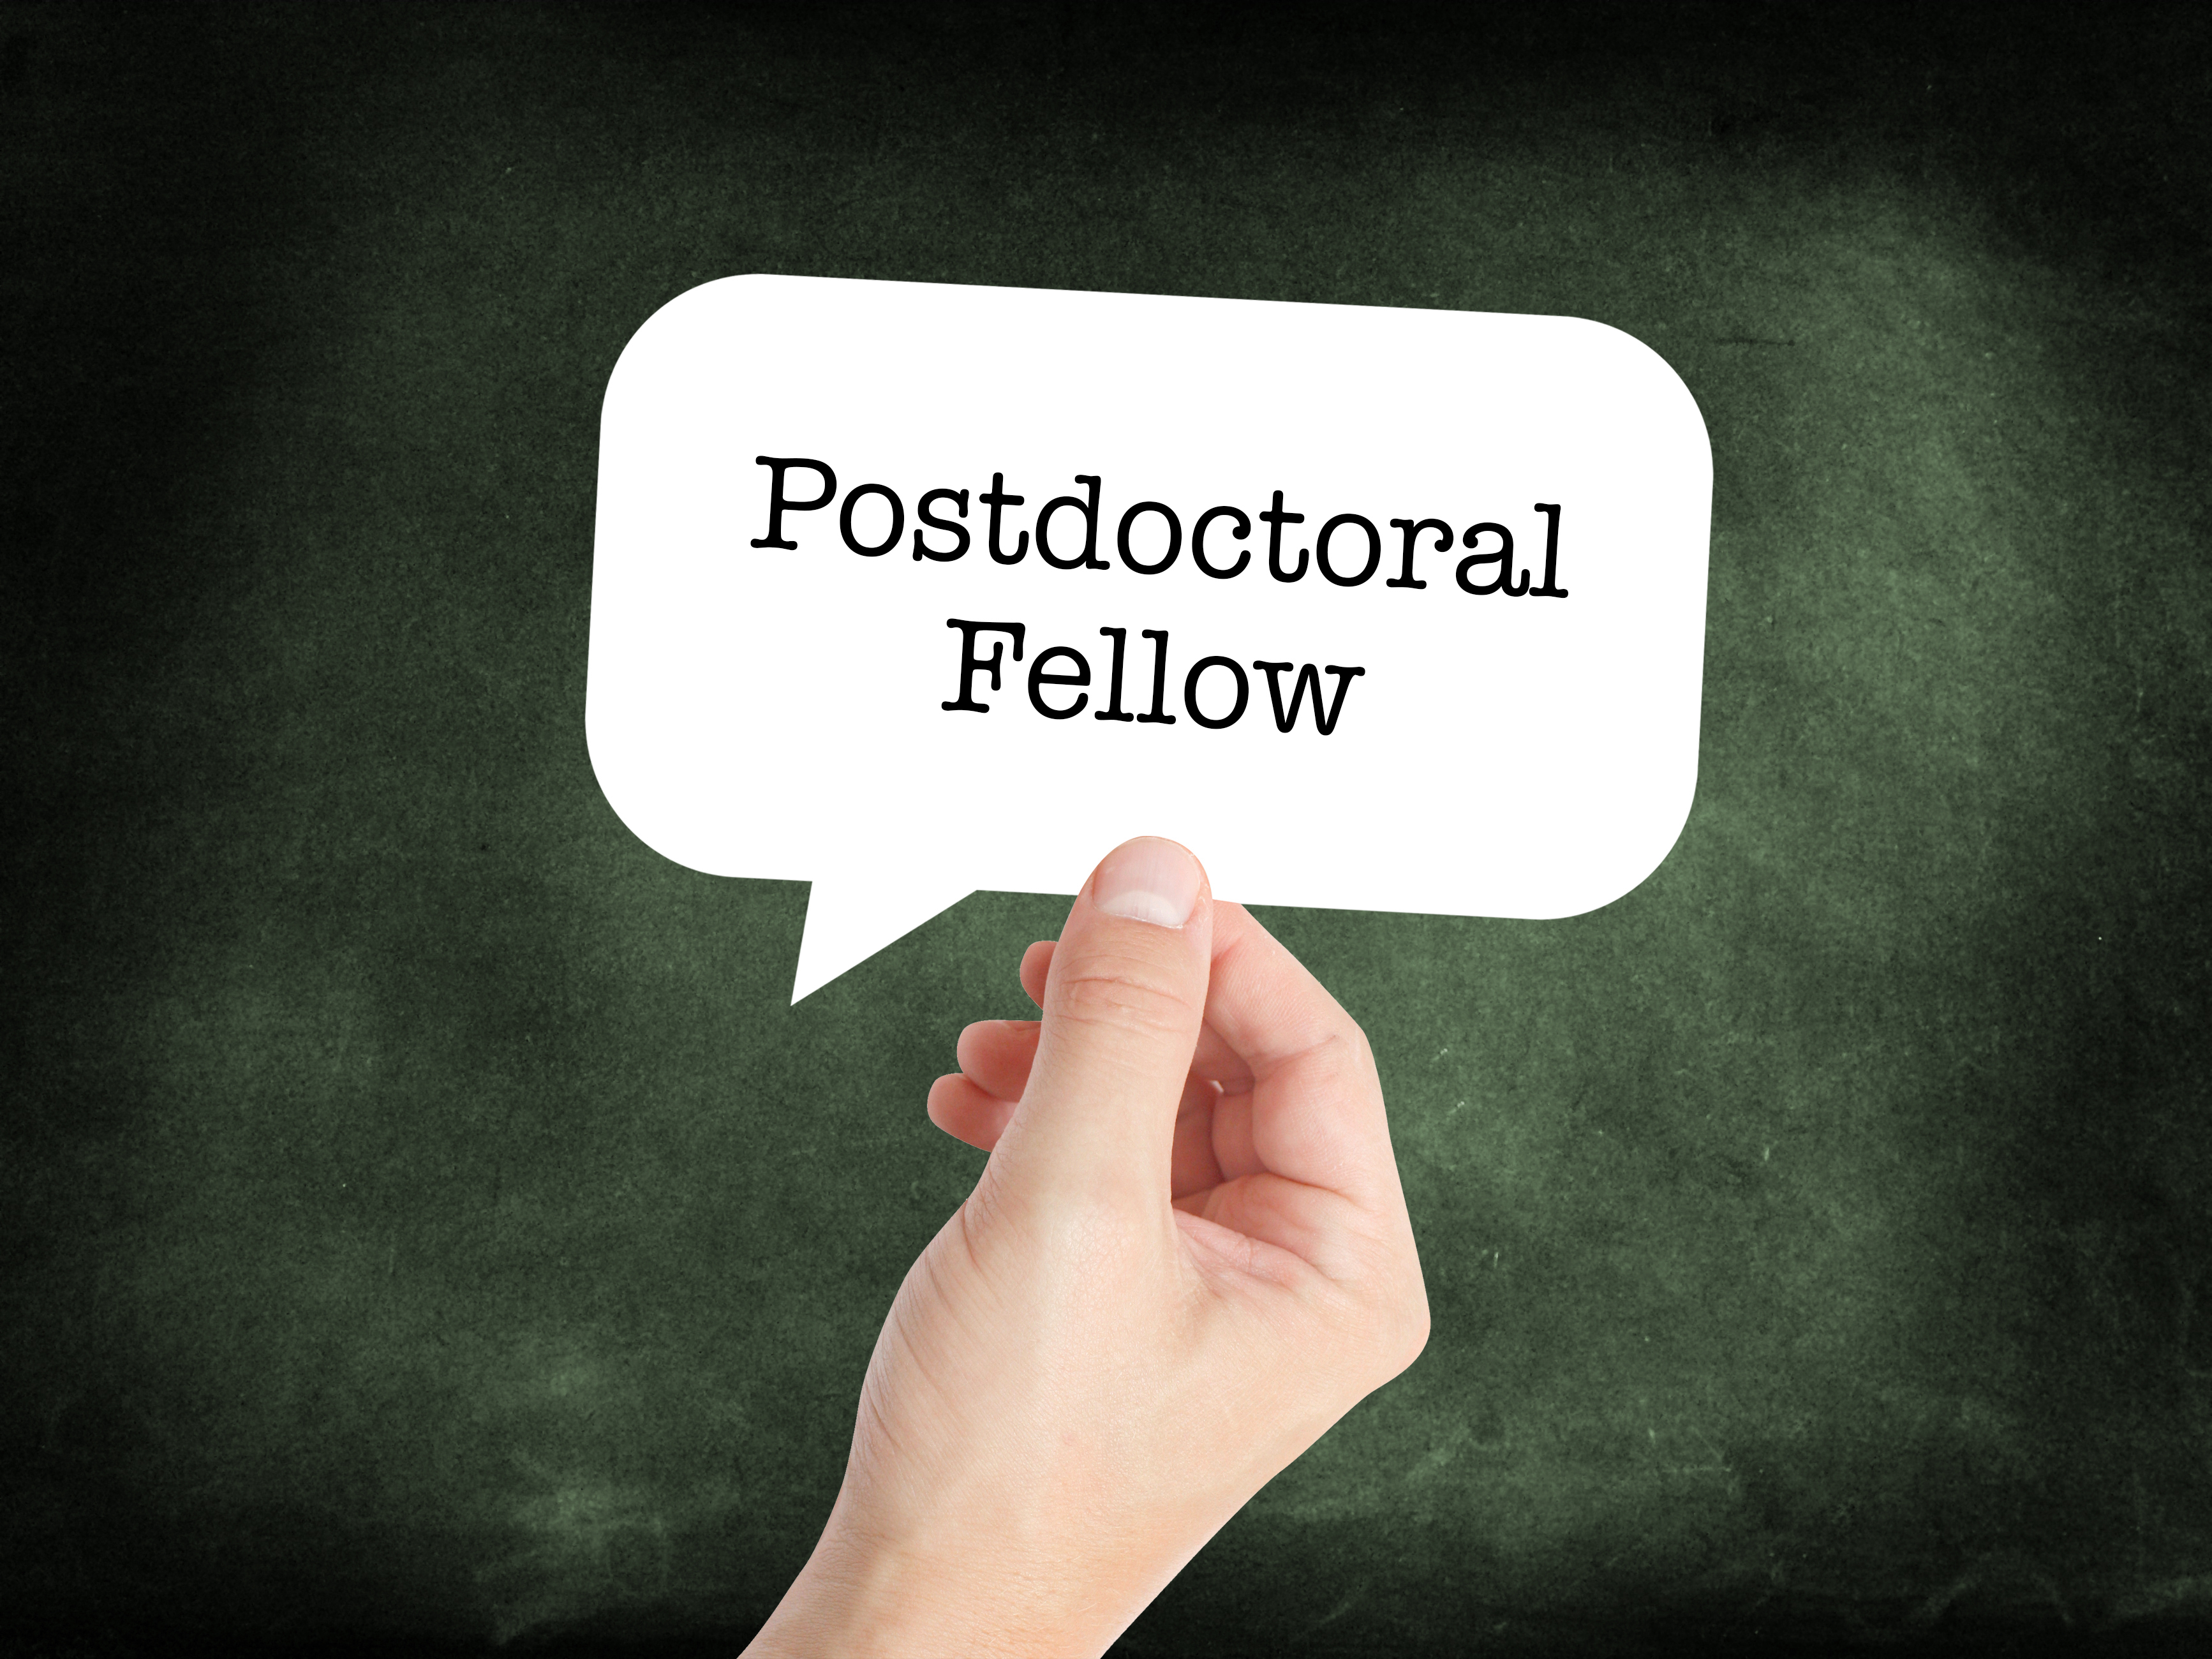 UEH provides 100% financial help to Postdoctoral Fellowship